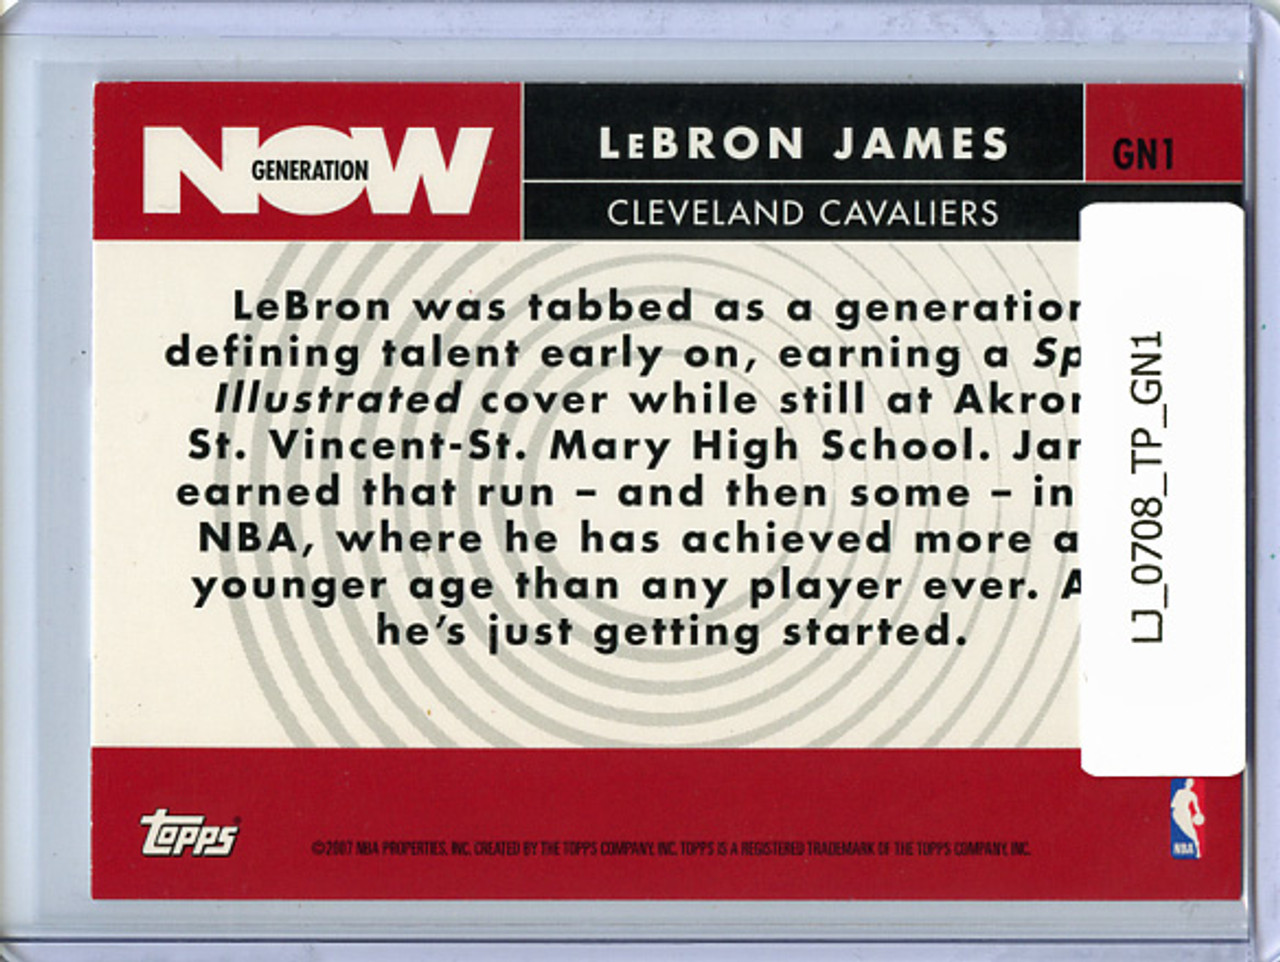 Lebron James 2007-08 Topps, Generation Now #GN-1